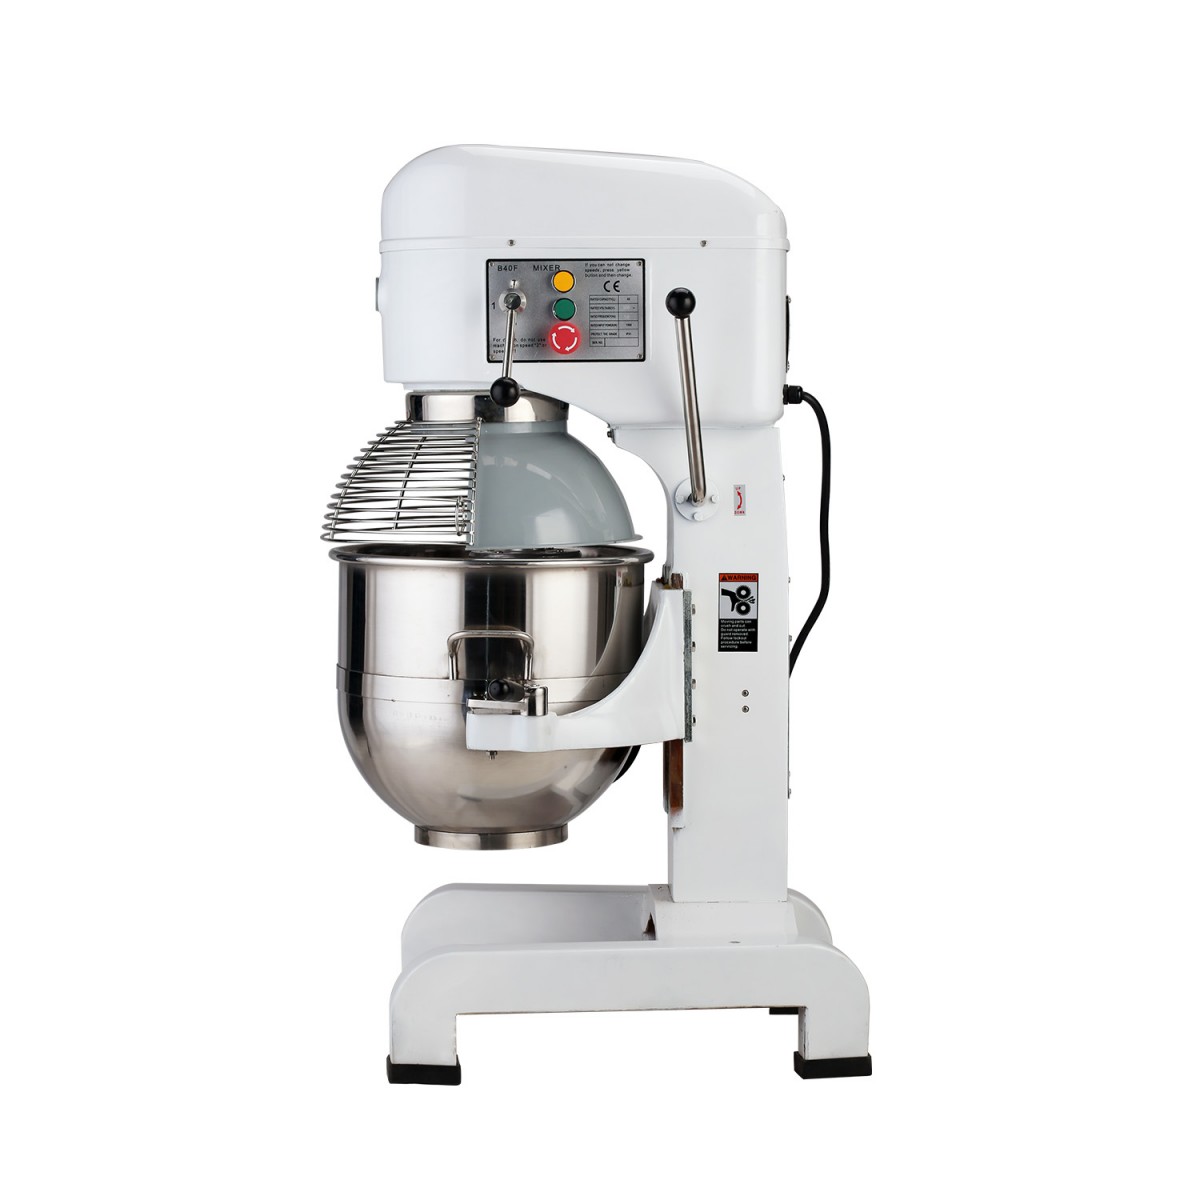 30L Gear Transmission CE with Safety Guard Planetary Food Mixer